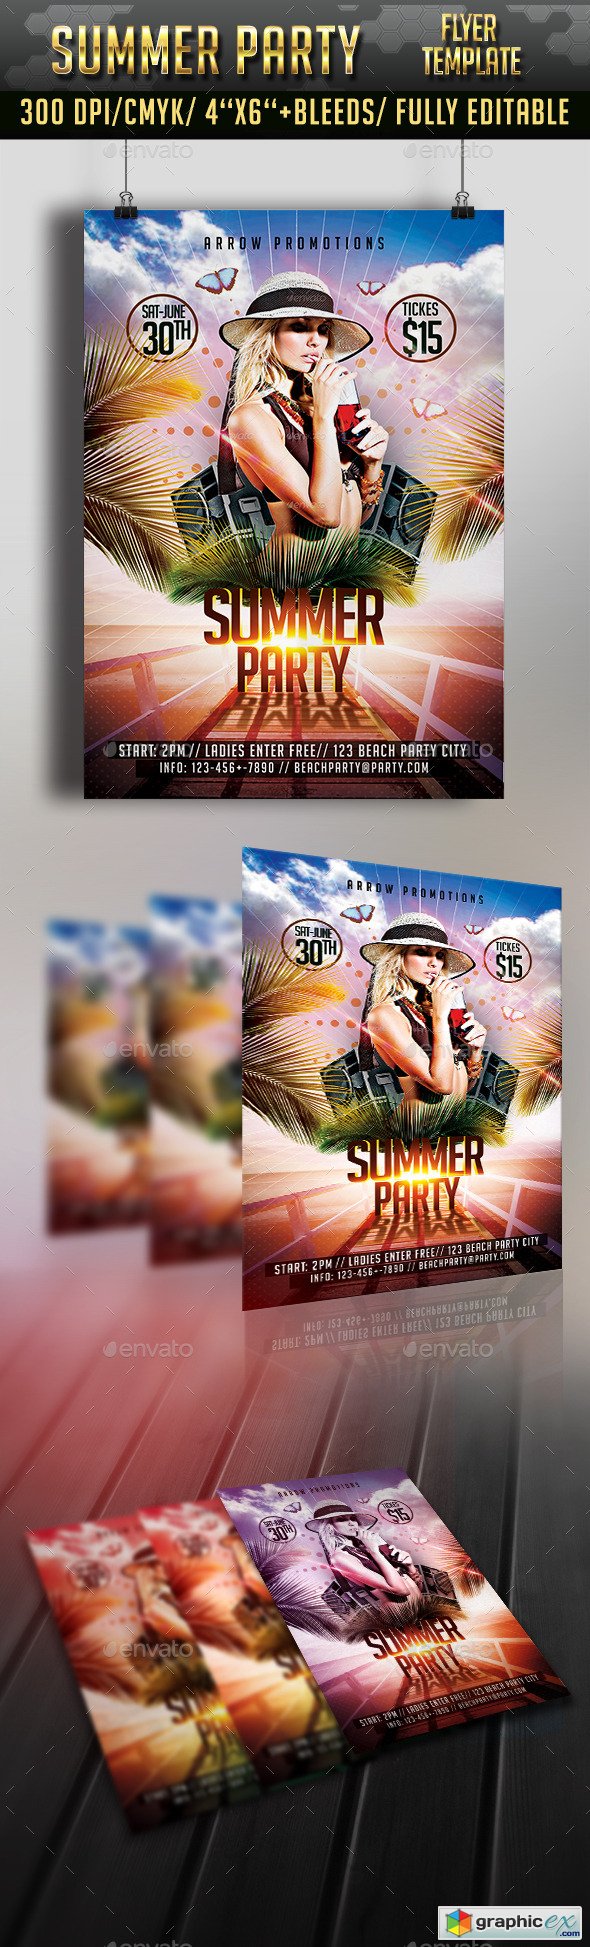 Summer Party Flyer Template 11583038